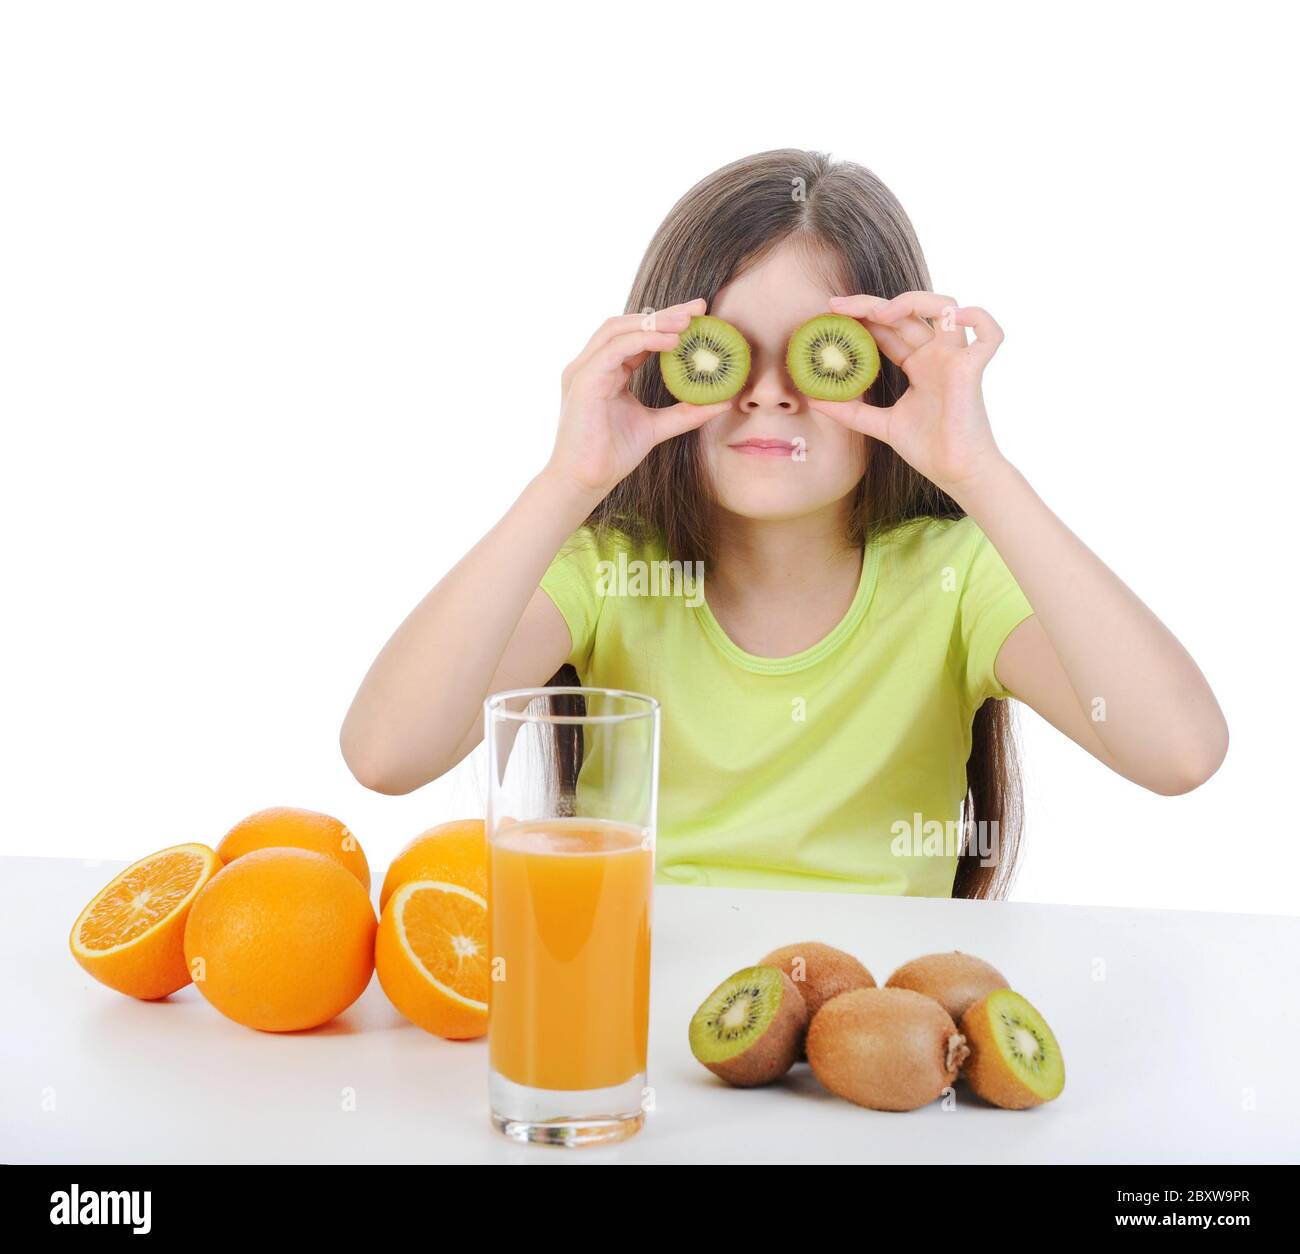 Girl with a kiwi at the table. Stock Photo